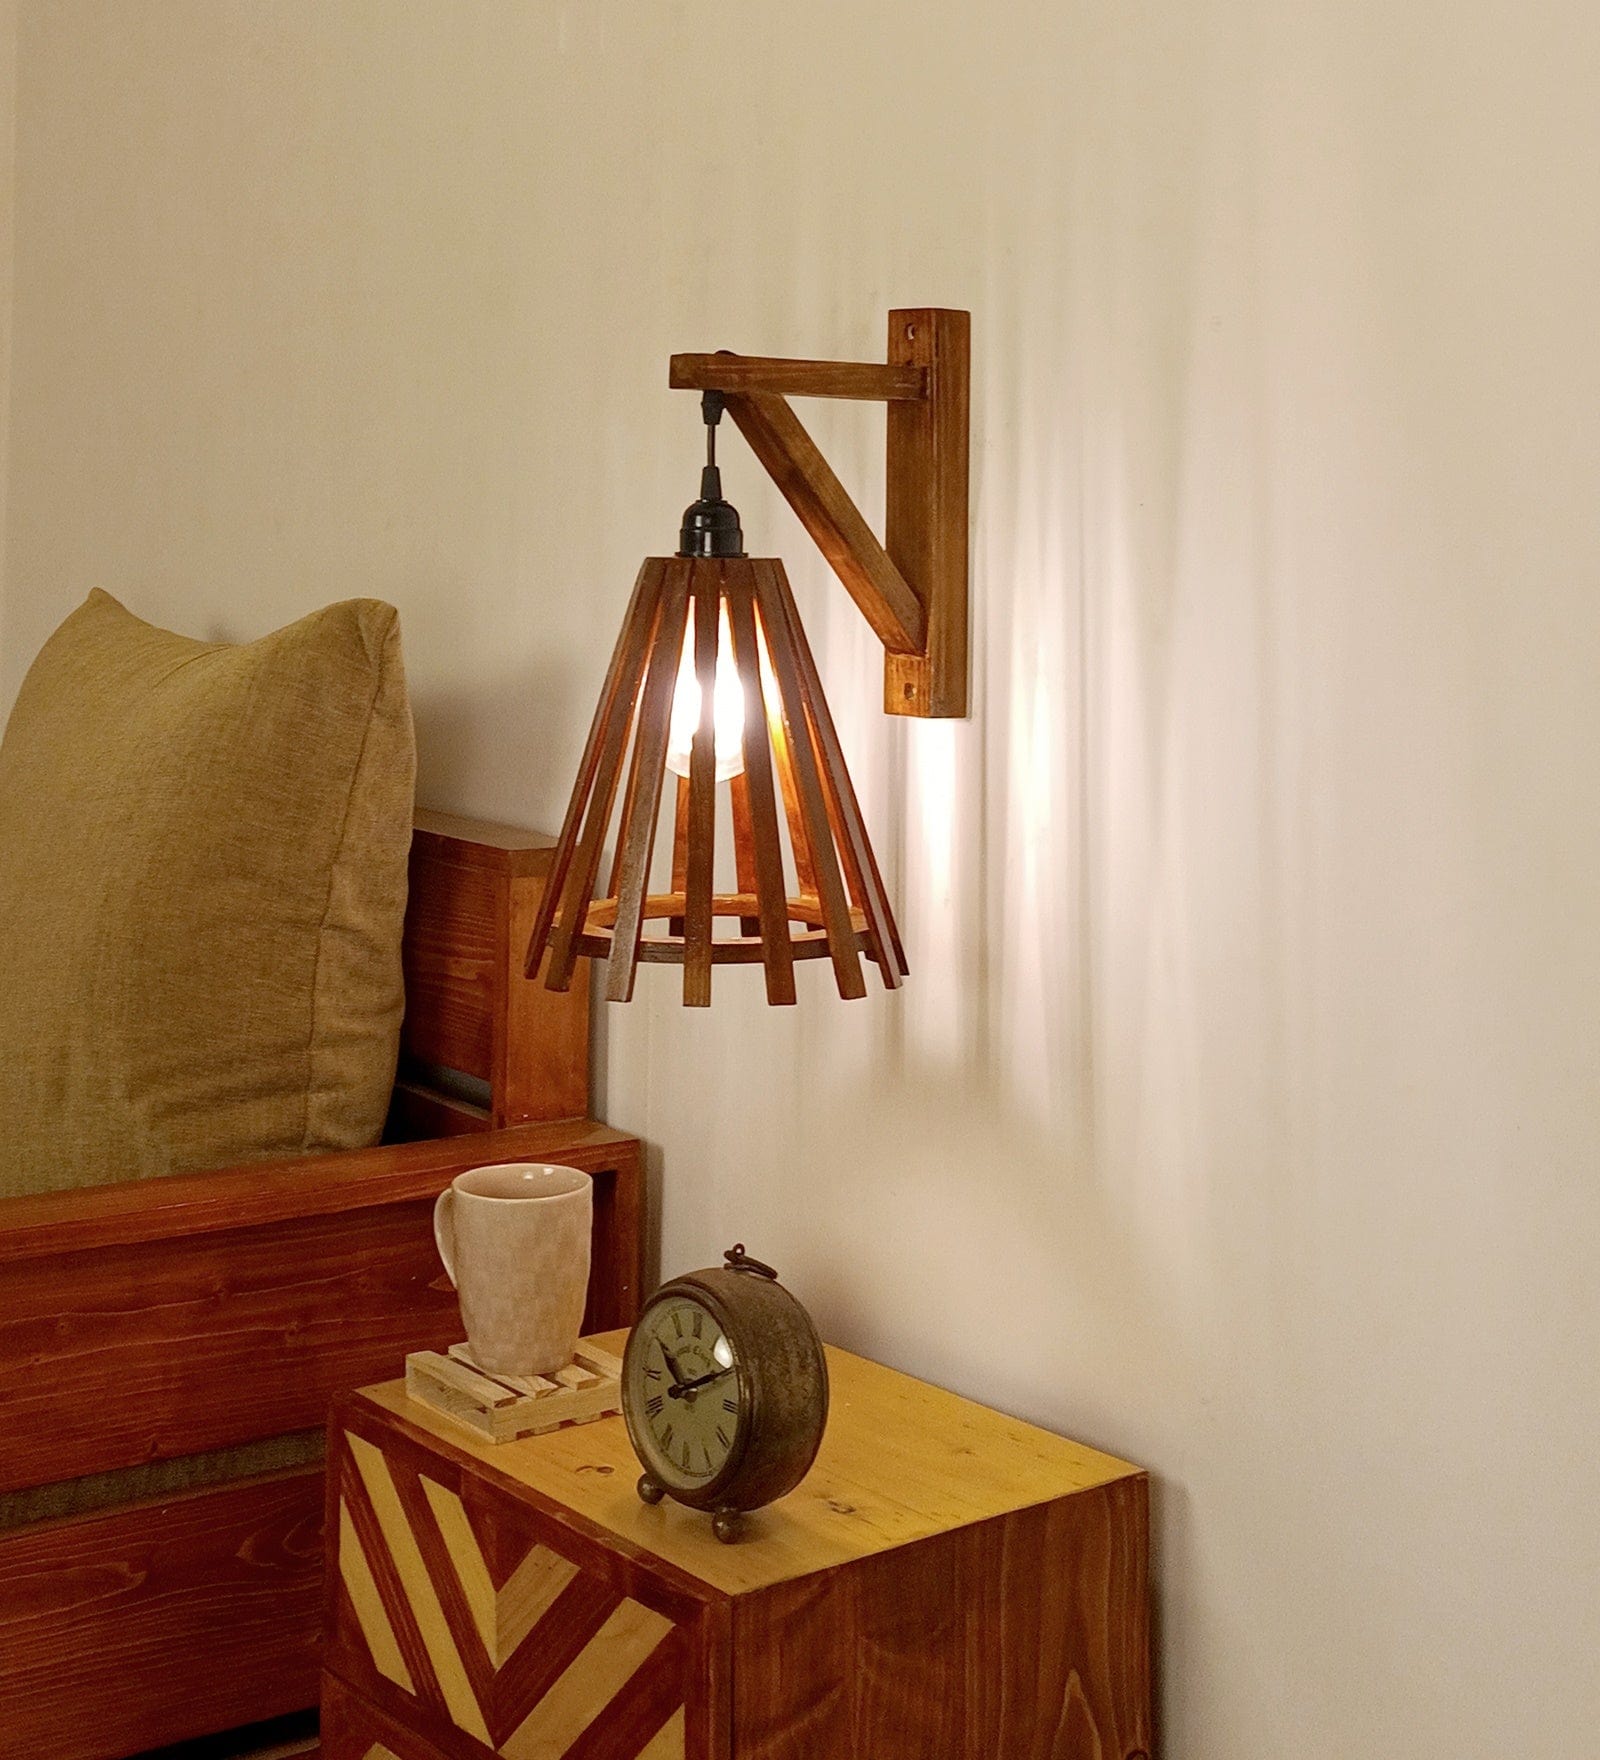 Funnel L Brown Wooden Wall Light (BULB NOT INCLUDED)